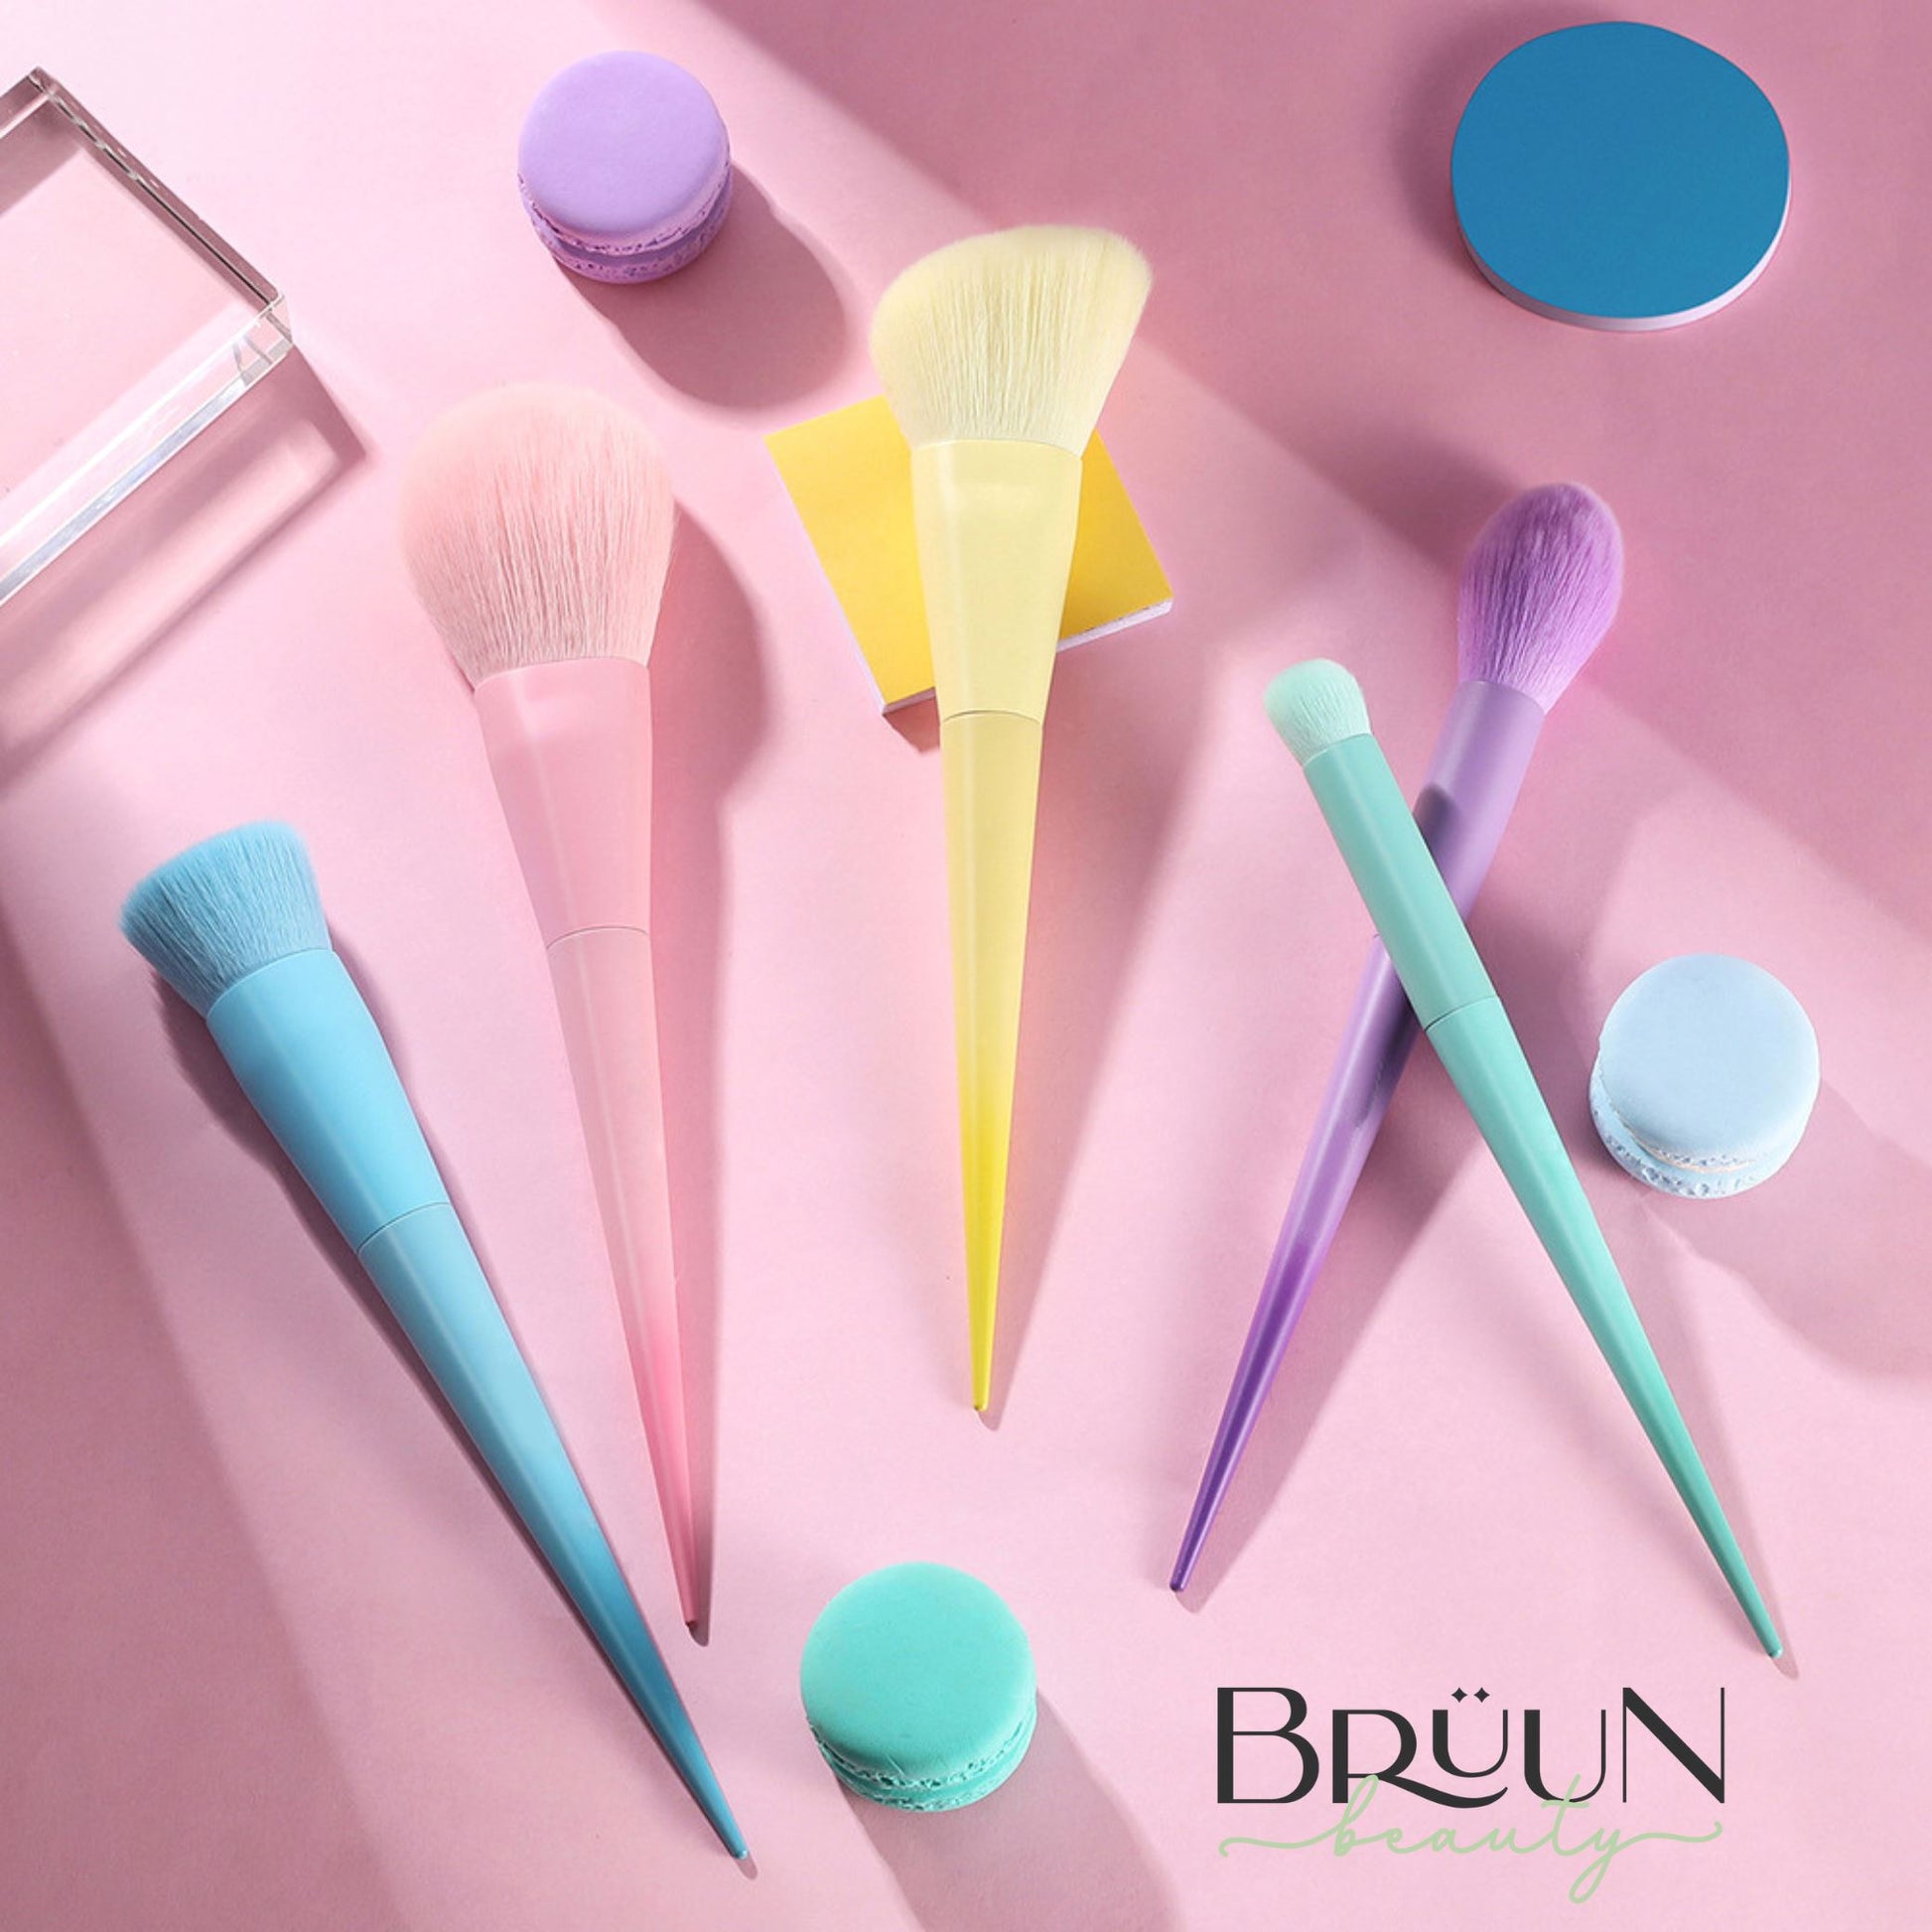 BRÜUN Makeup Brushes Set- A (17 Pcs) Premium Quality Synthetic and Colorful Brushes Kit with Purple Top and Blue Bottom Sponges for Blush Concealers, Blending Face Powder and Eyeshadow Makeup Bruun Beauty 